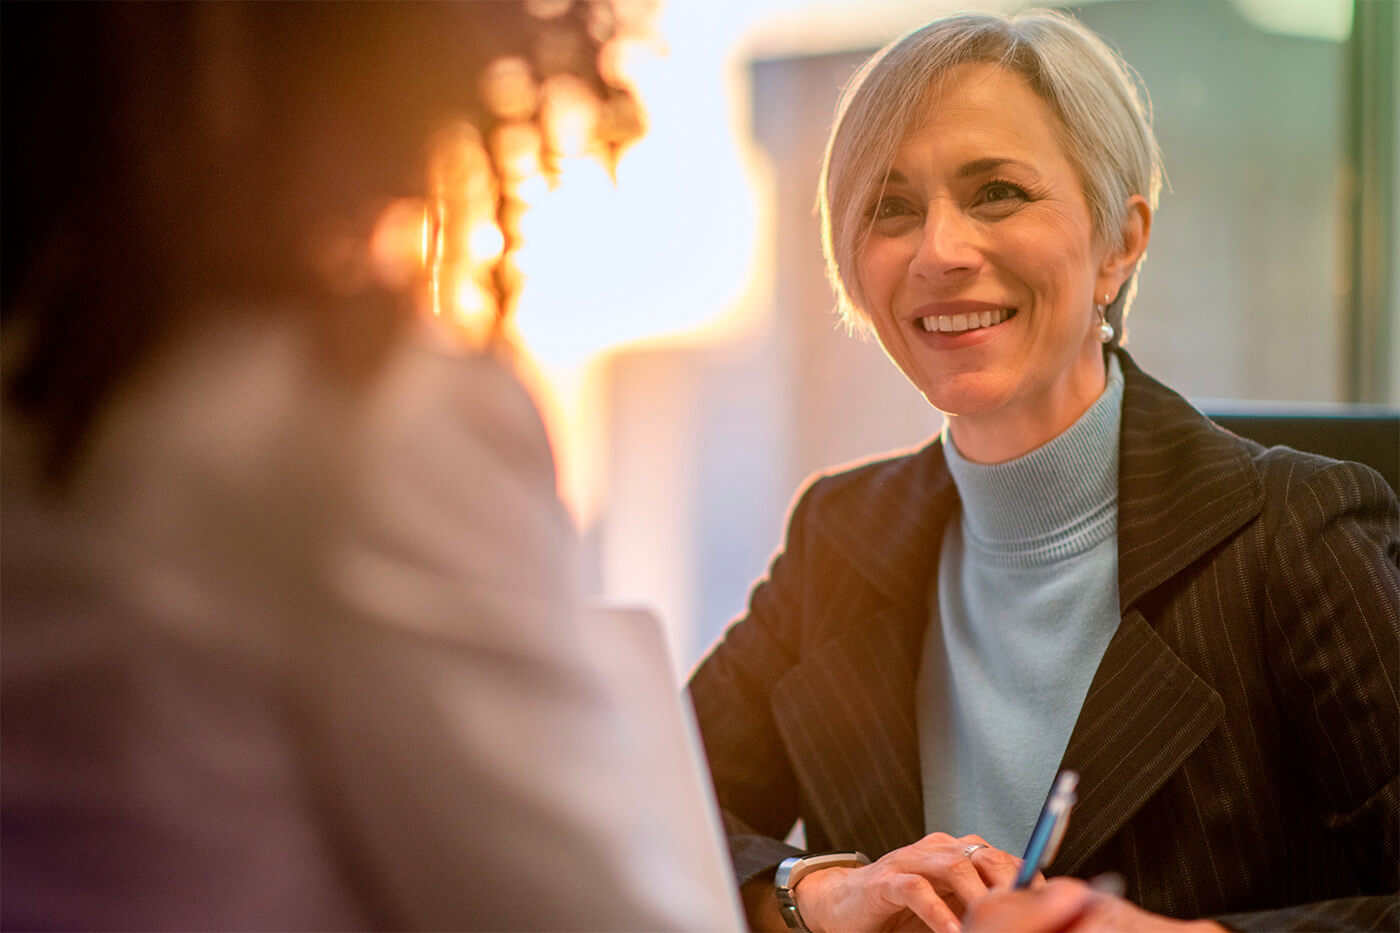 A view over a woman's shoulder showing a smiling businesswoman, possibly engaged in discussions related to escrow services, corporate actions, and corporate escrow support.